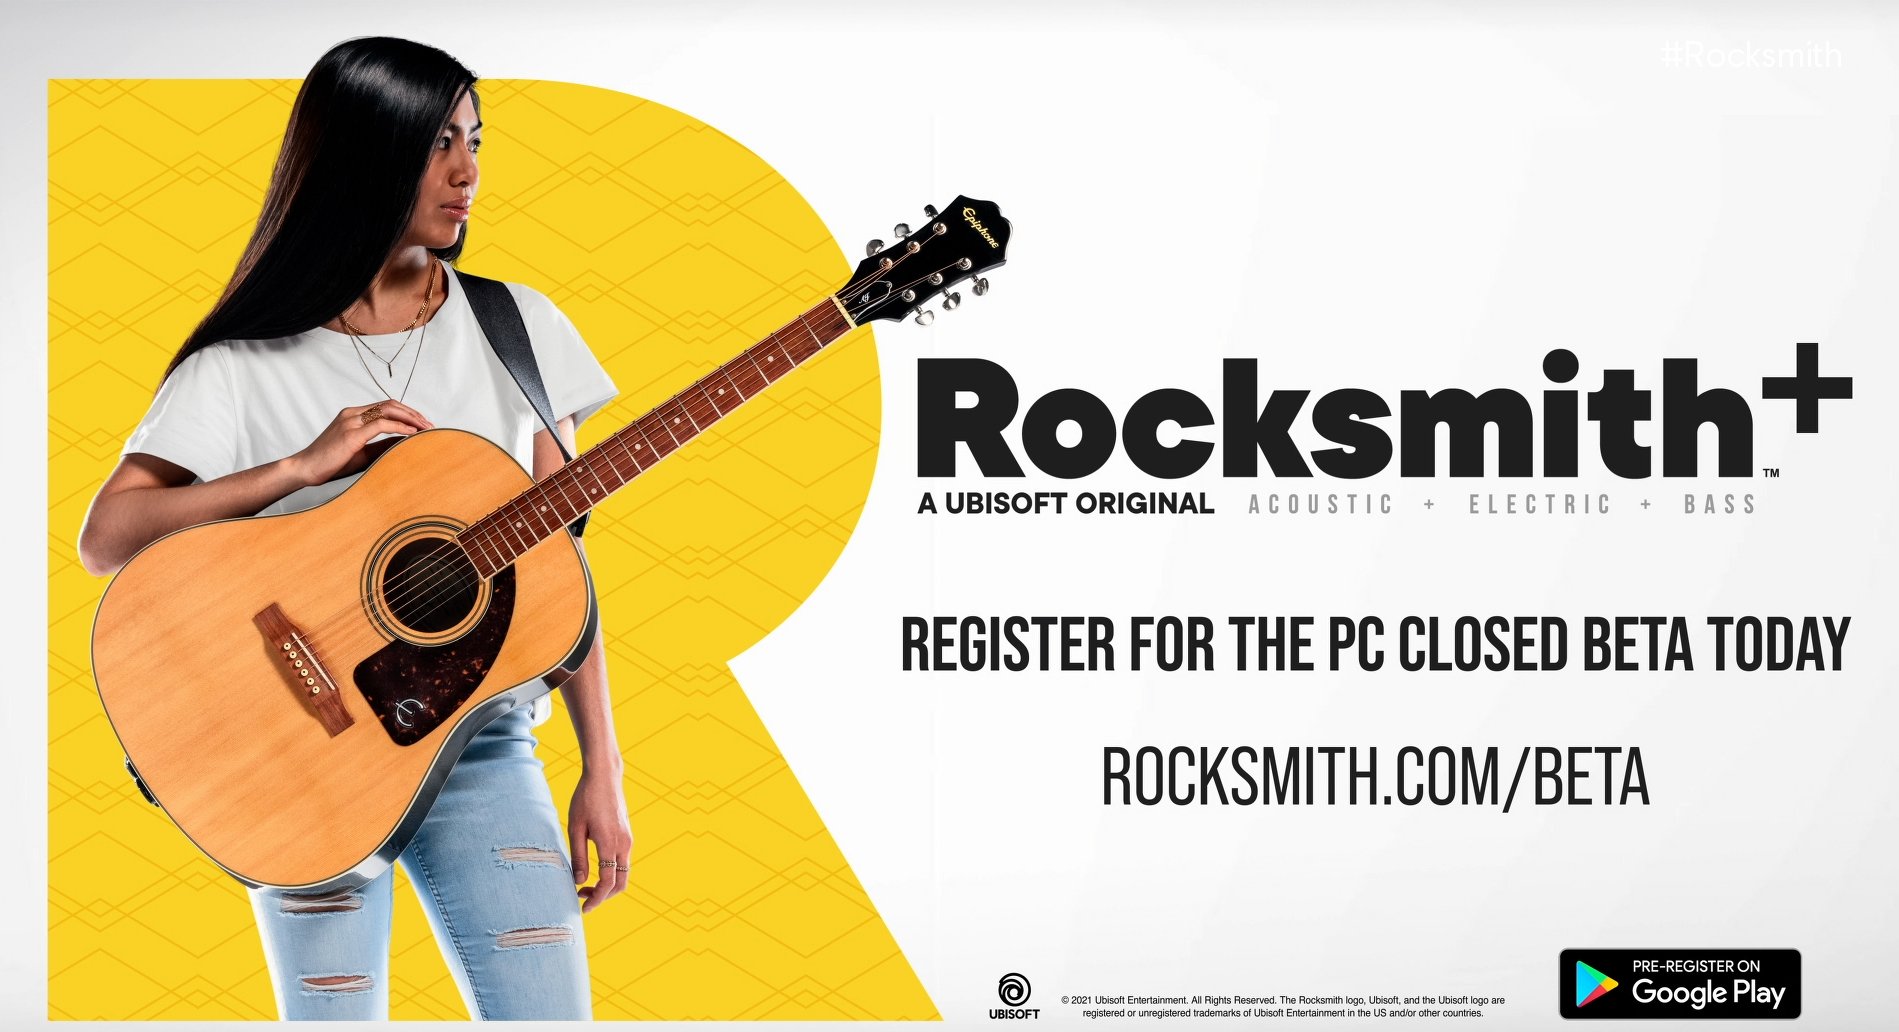 Rocksmith Plus Brings Back How We Learn to Play the Guitar IRBGamer